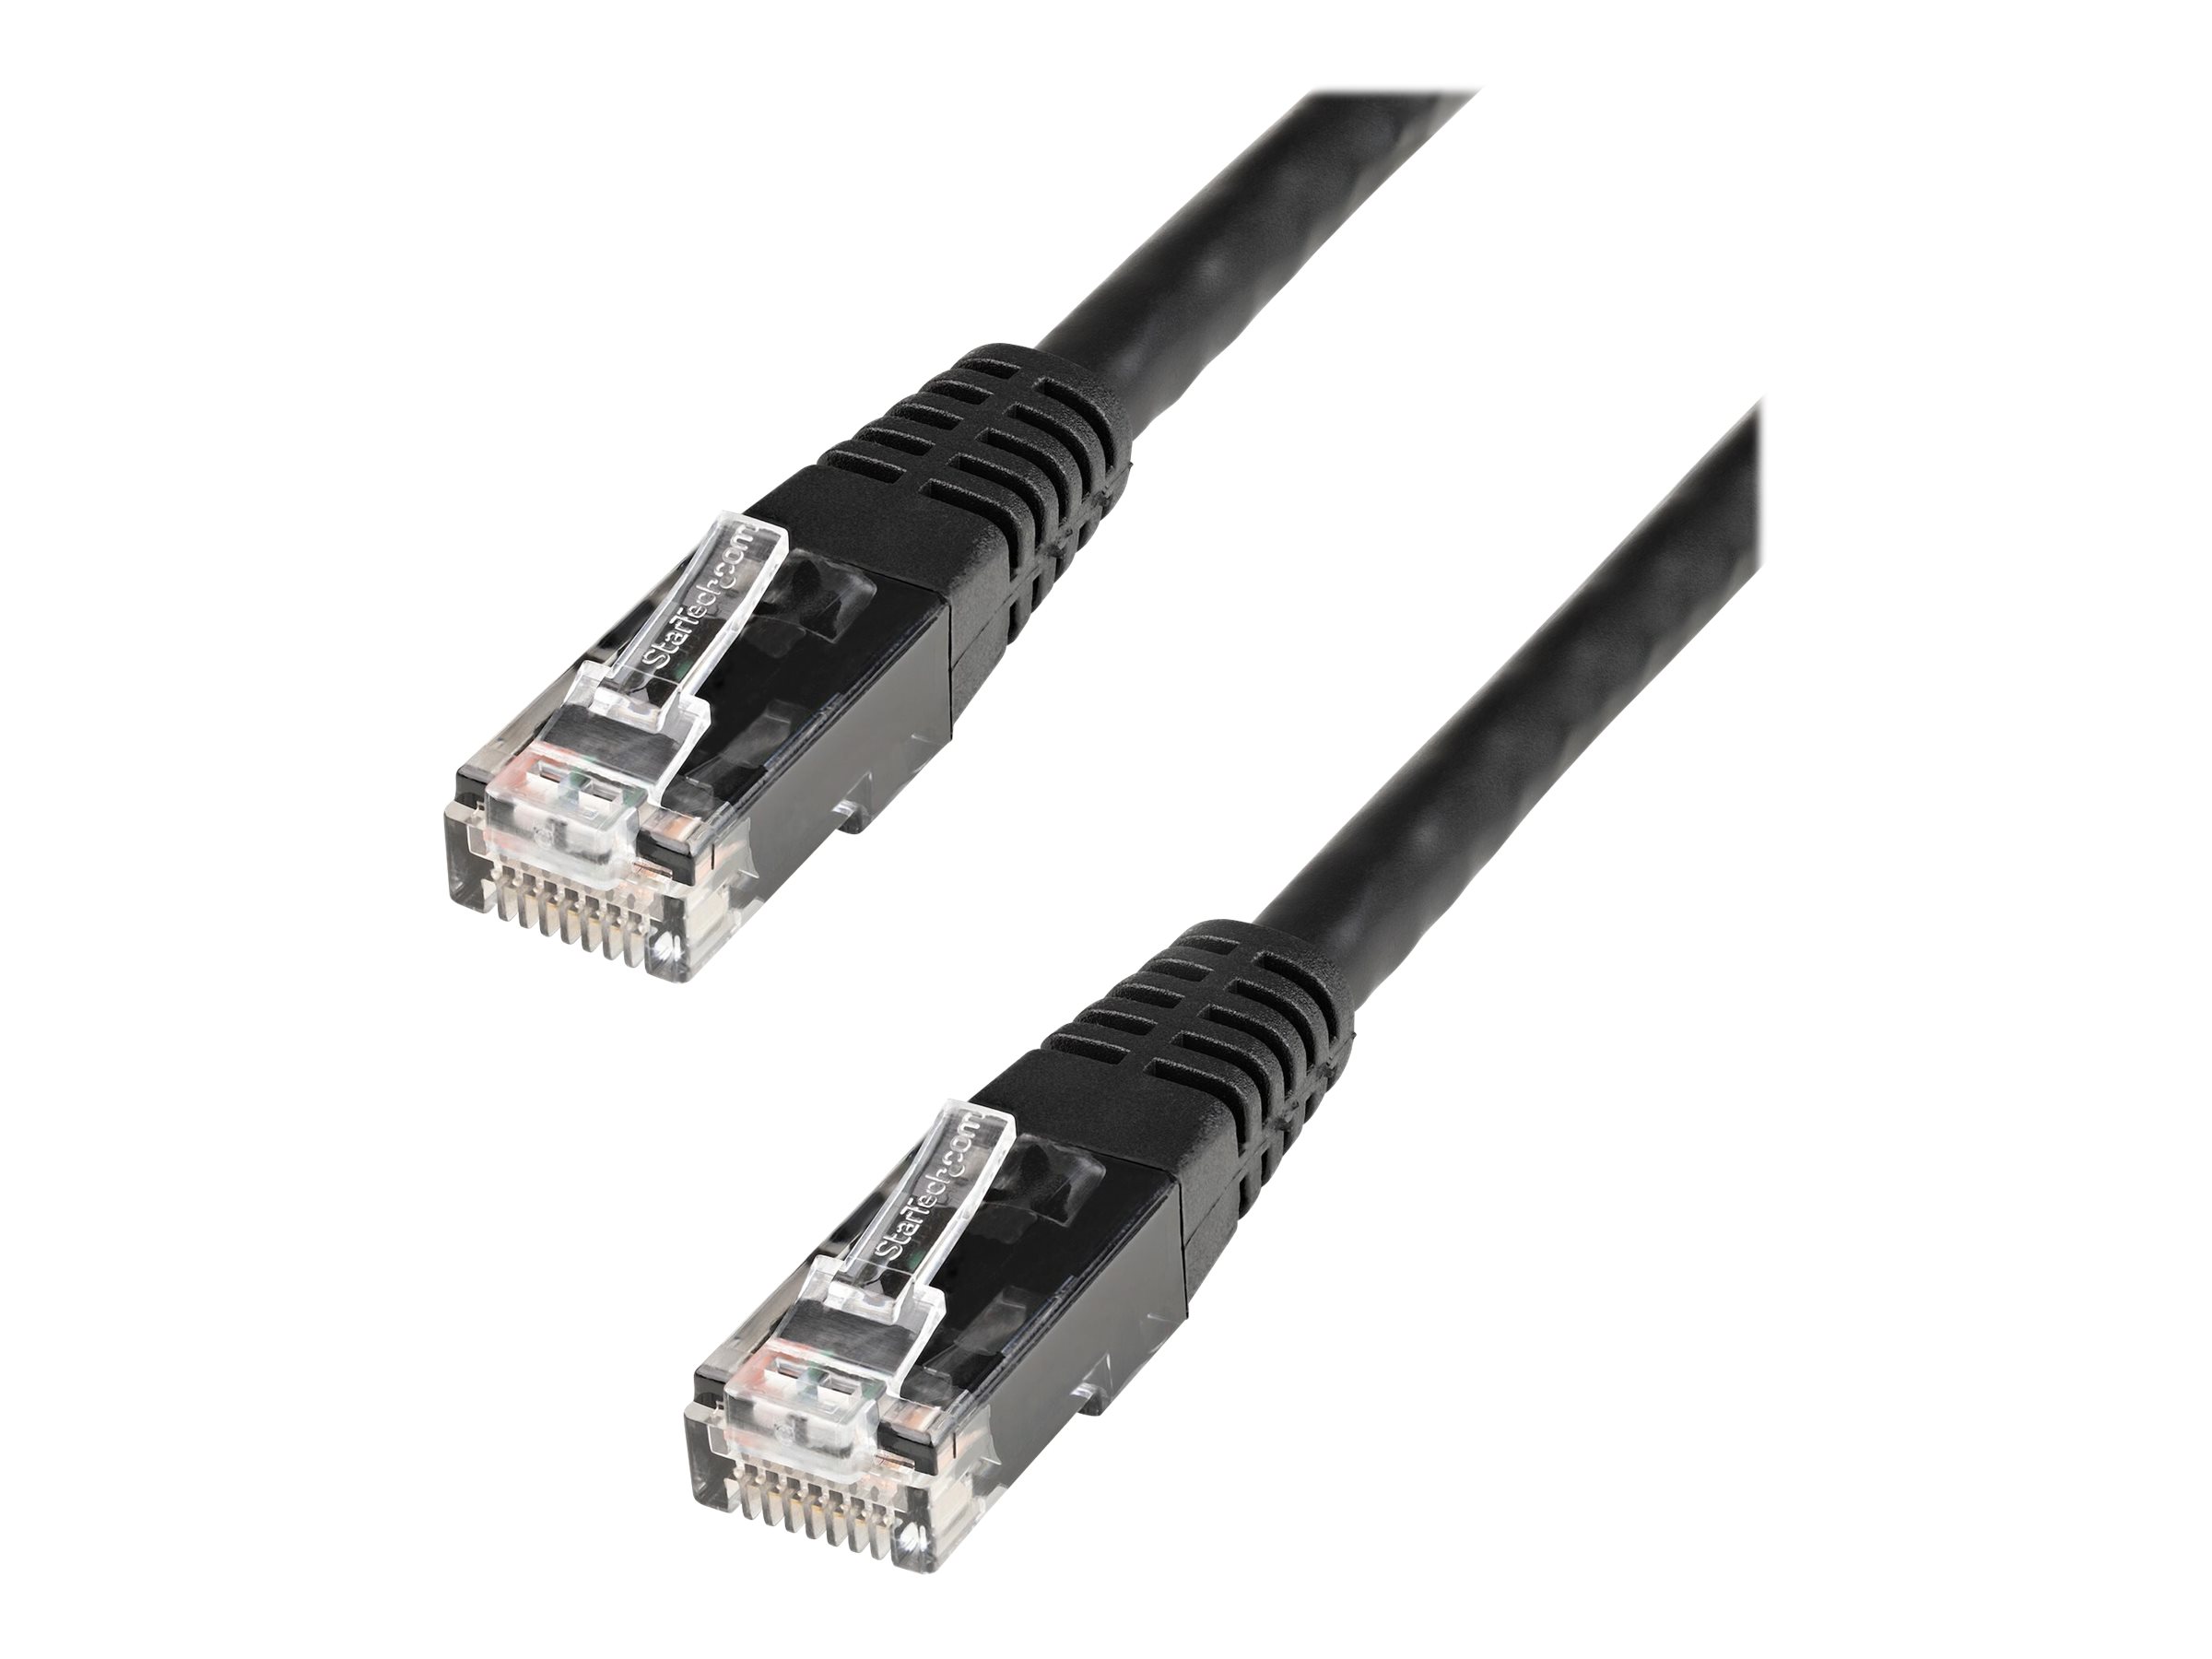 StarTech.com 35ft CAT6 Ethernet Cable, 10 Gigabit Molded RJ45 650MHz 100W PoE Patch Cord, CAT 6 10GbE UTP Network Cable with Strain Relief, Black, Fluke Tested/Wiring is UL Certified/TIA